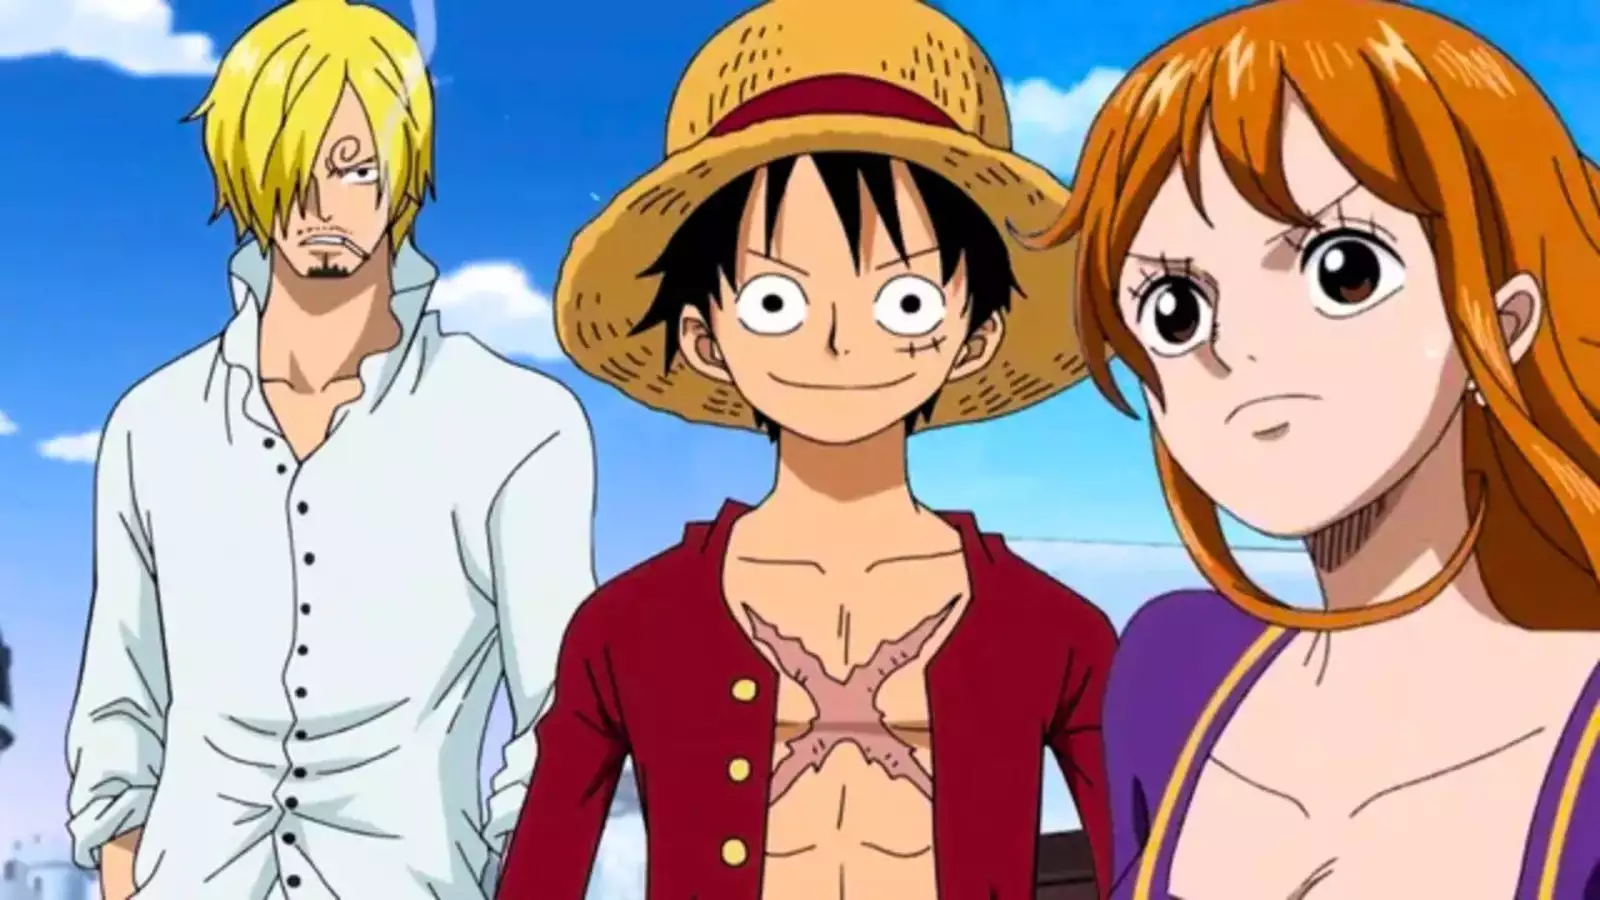 The Artistic Evolution of One Piece A Look into Its Dynamic Visual Journey